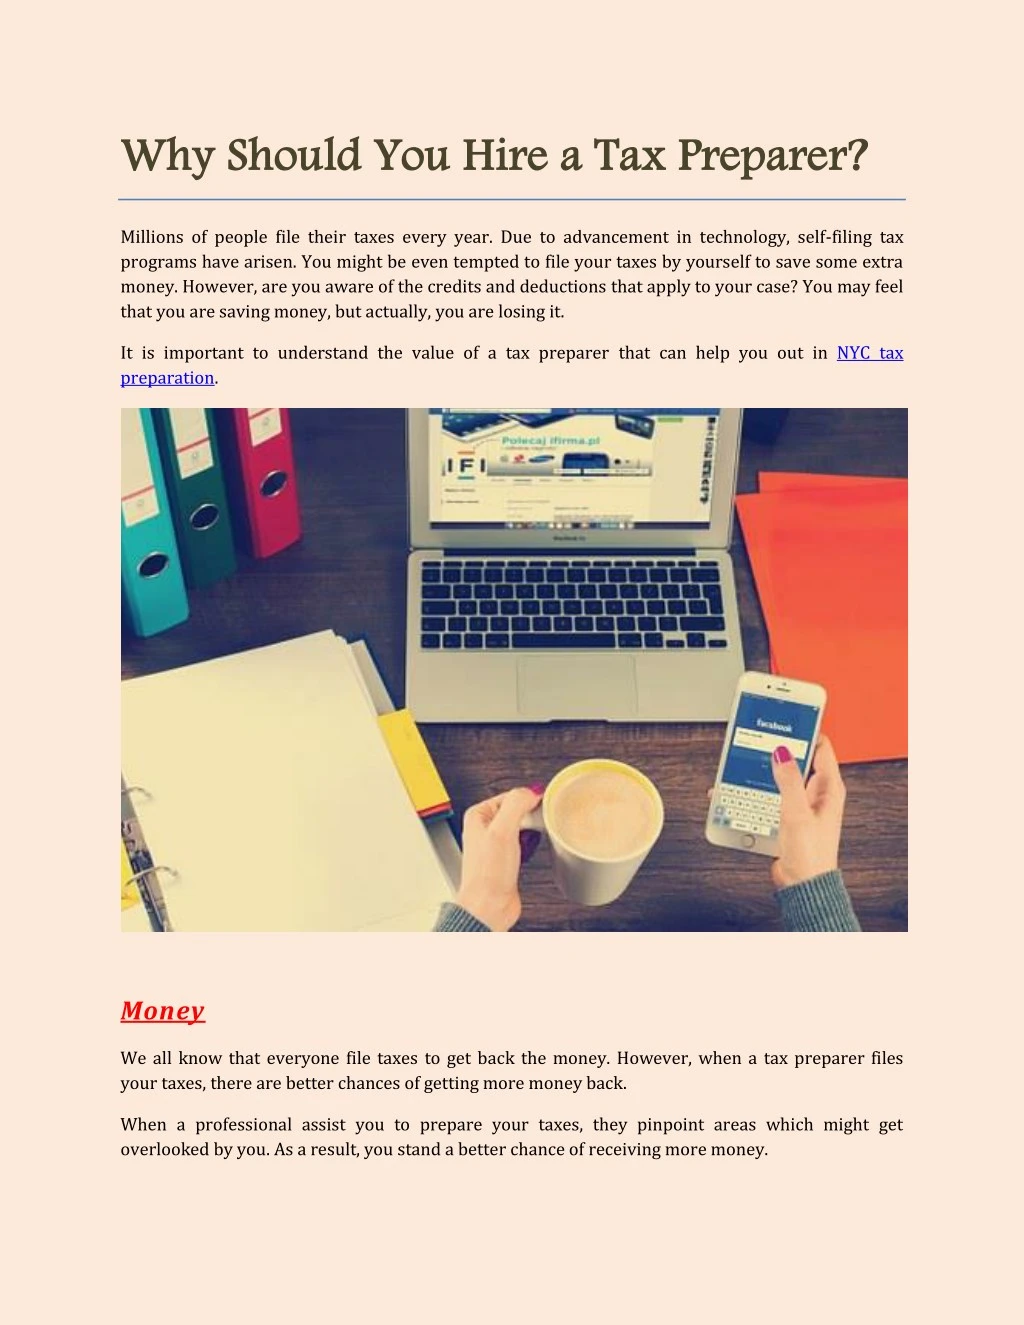 why should you hire a tax preparer